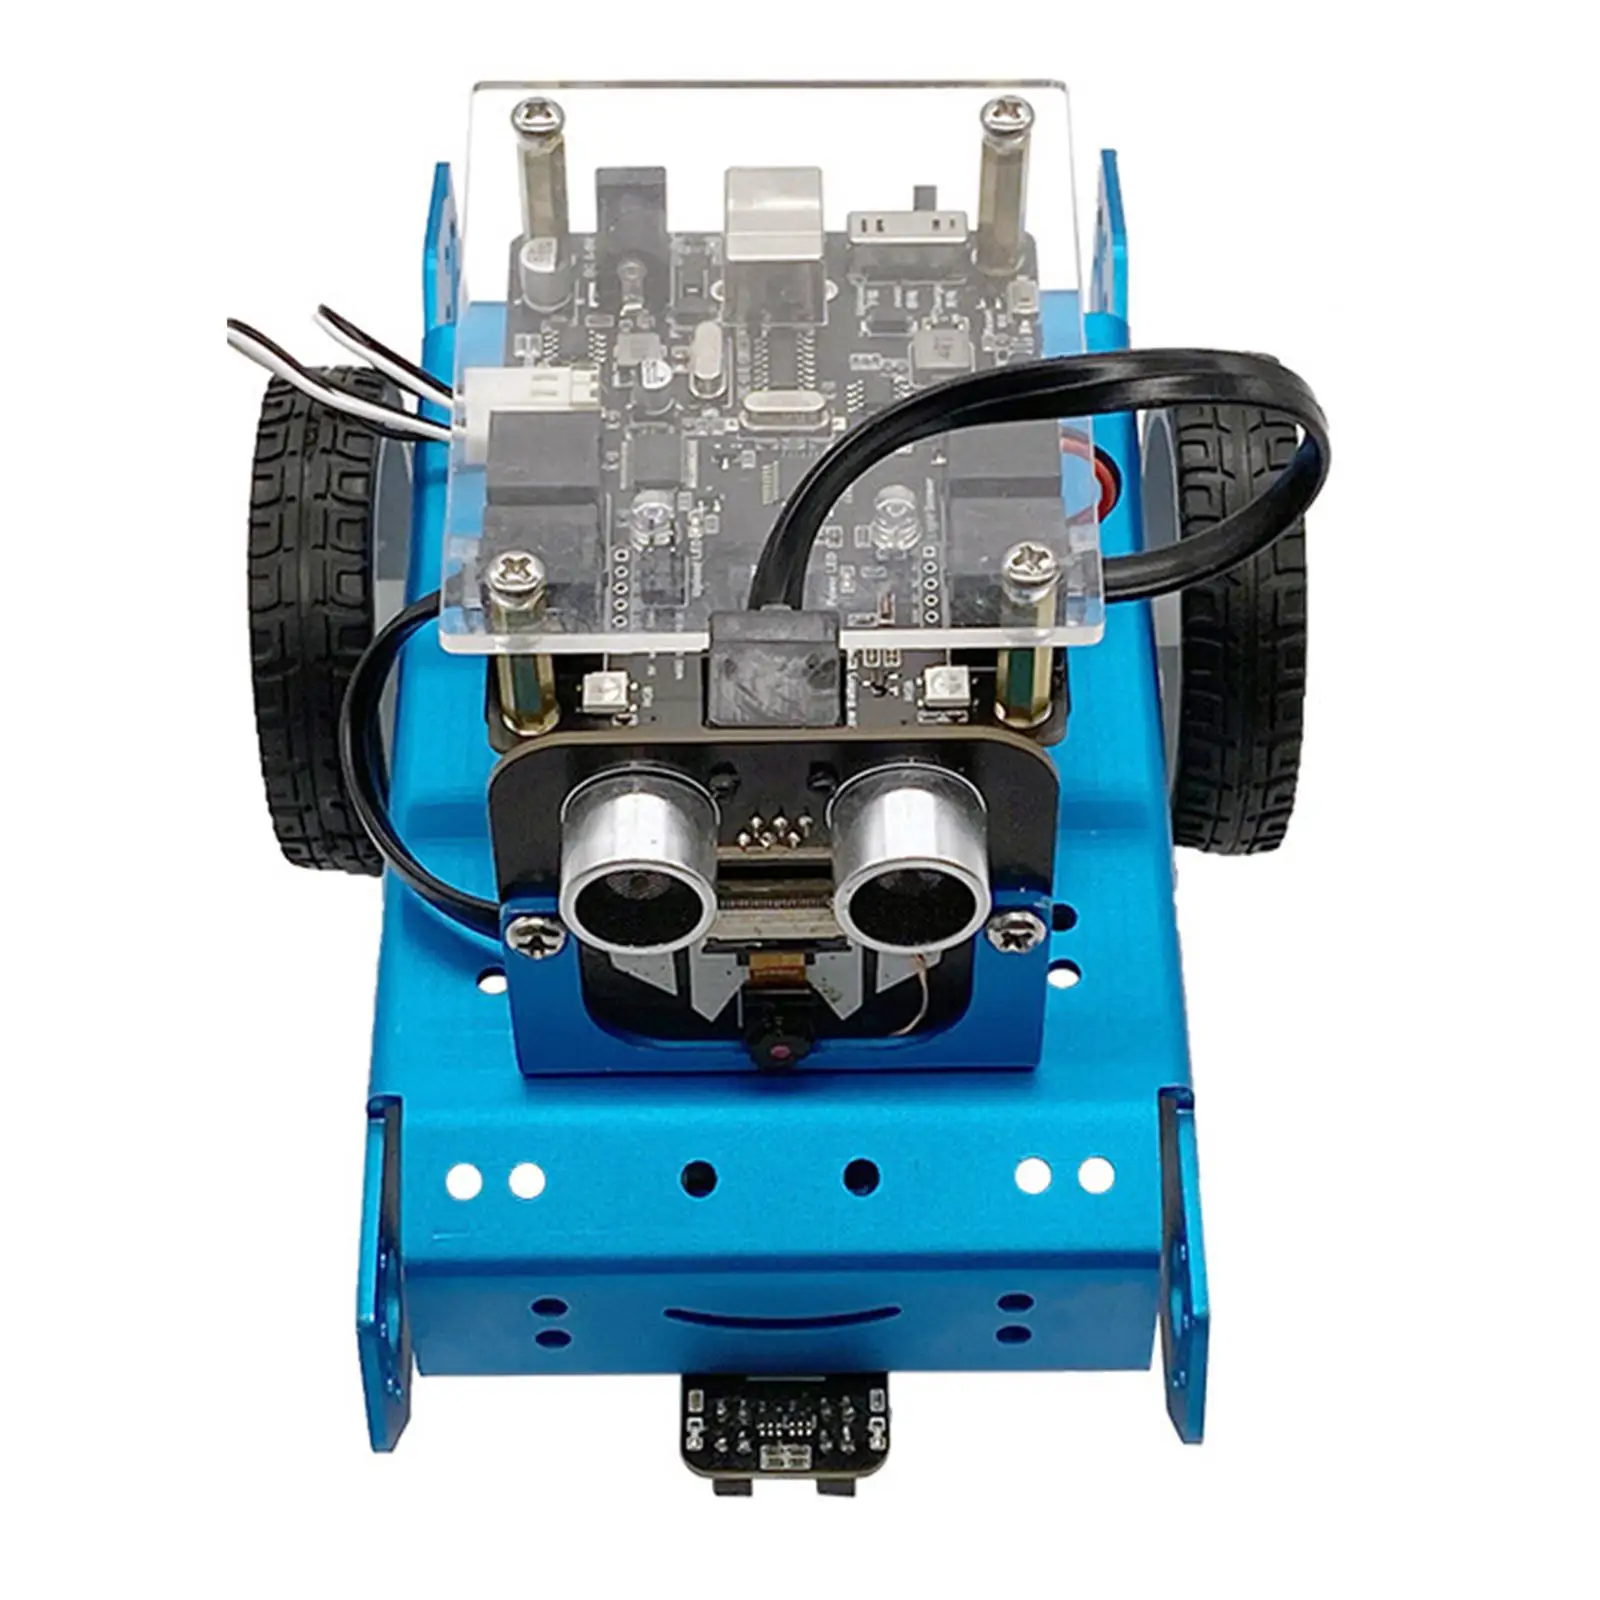 Programming Thrust Robot DIY for Hands on Electronic Learning Concentration